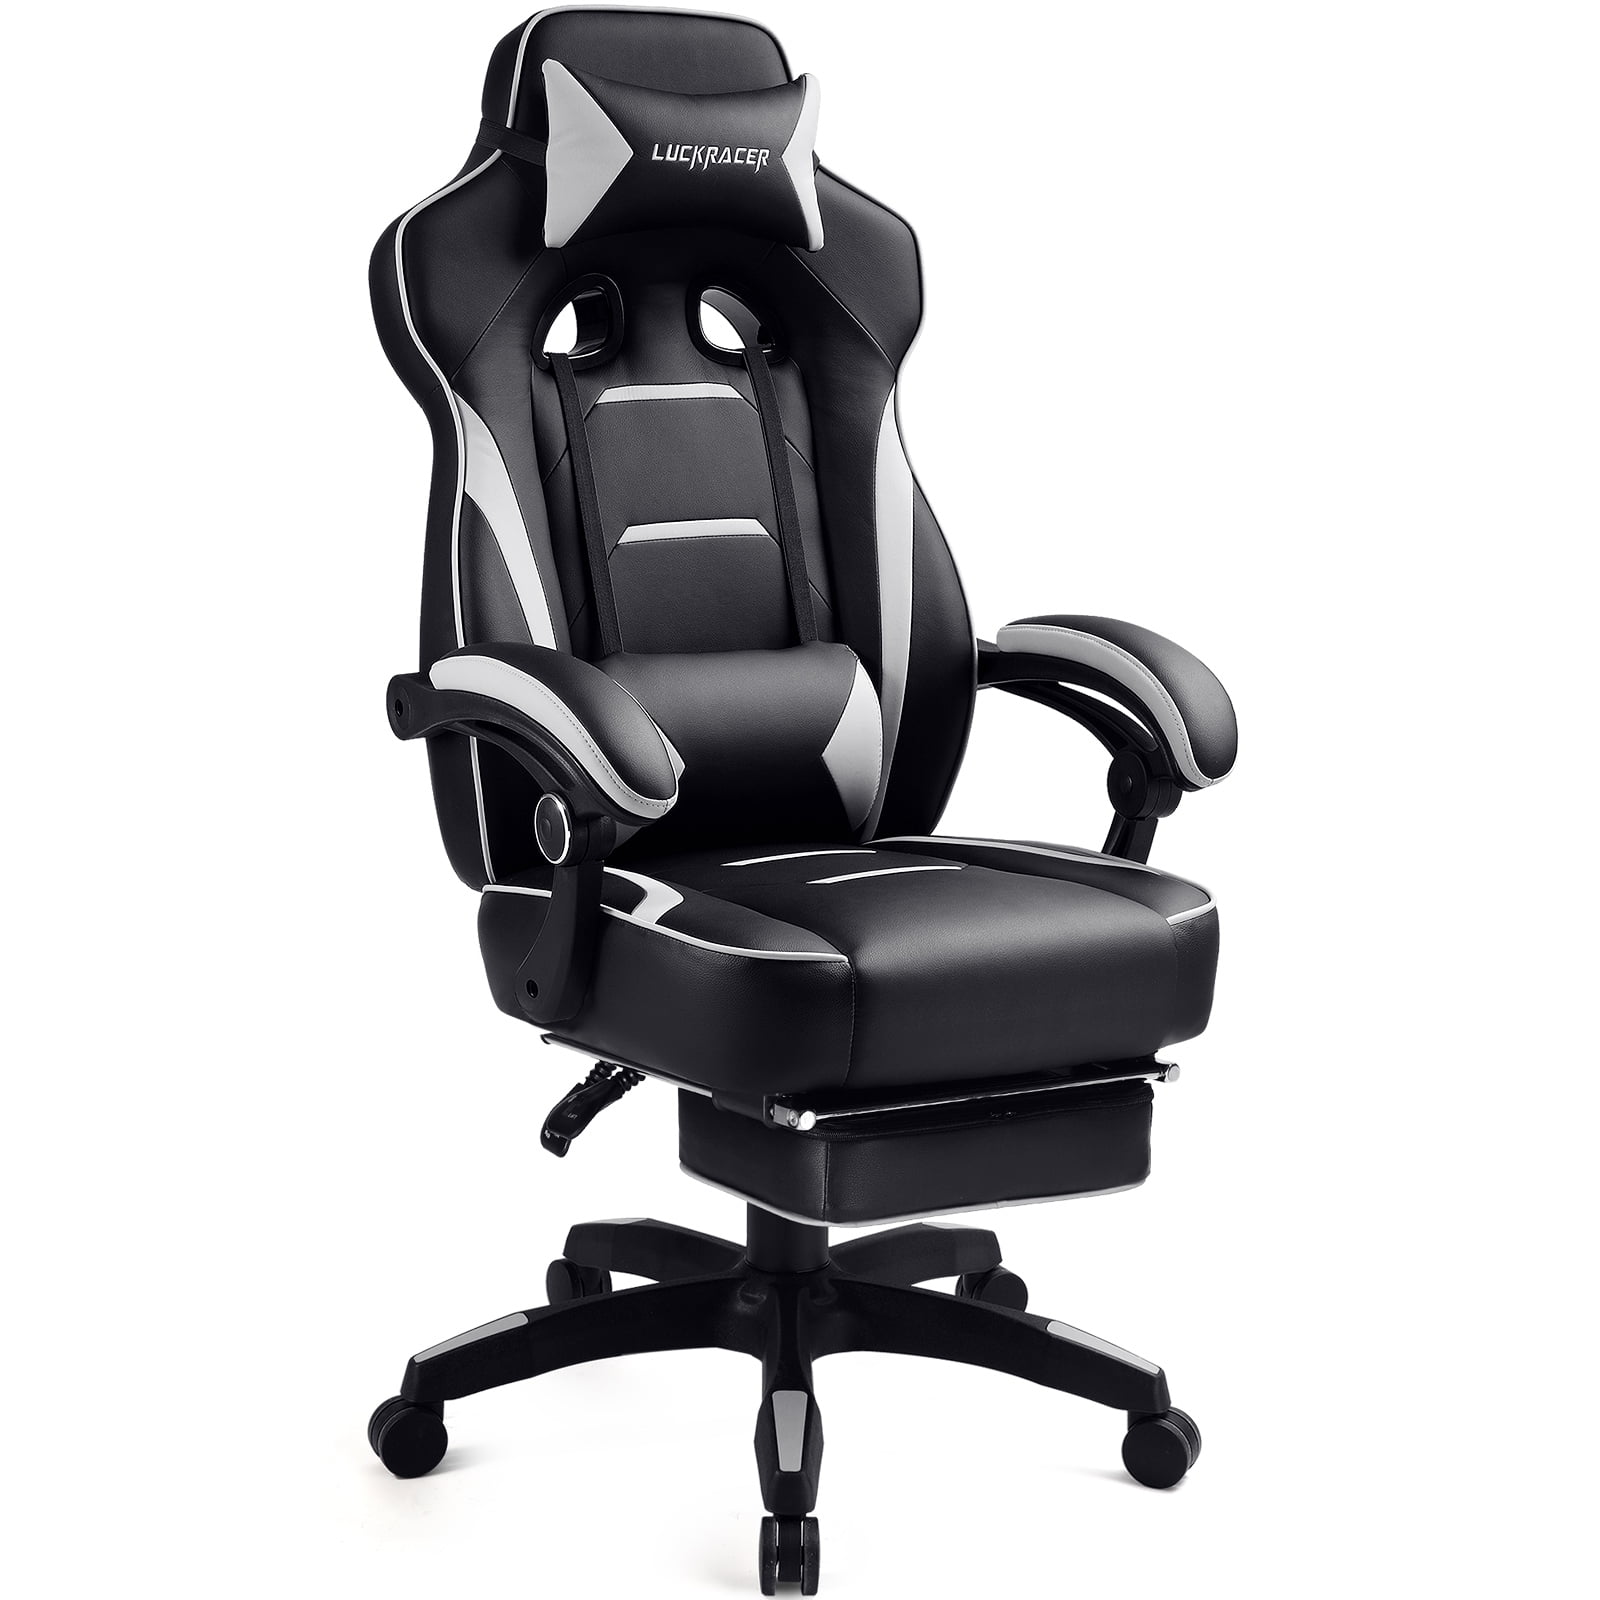 GTRACING Gaming Chair Racing PU Leather&Fabric Ergonomic Computer Office Chair 